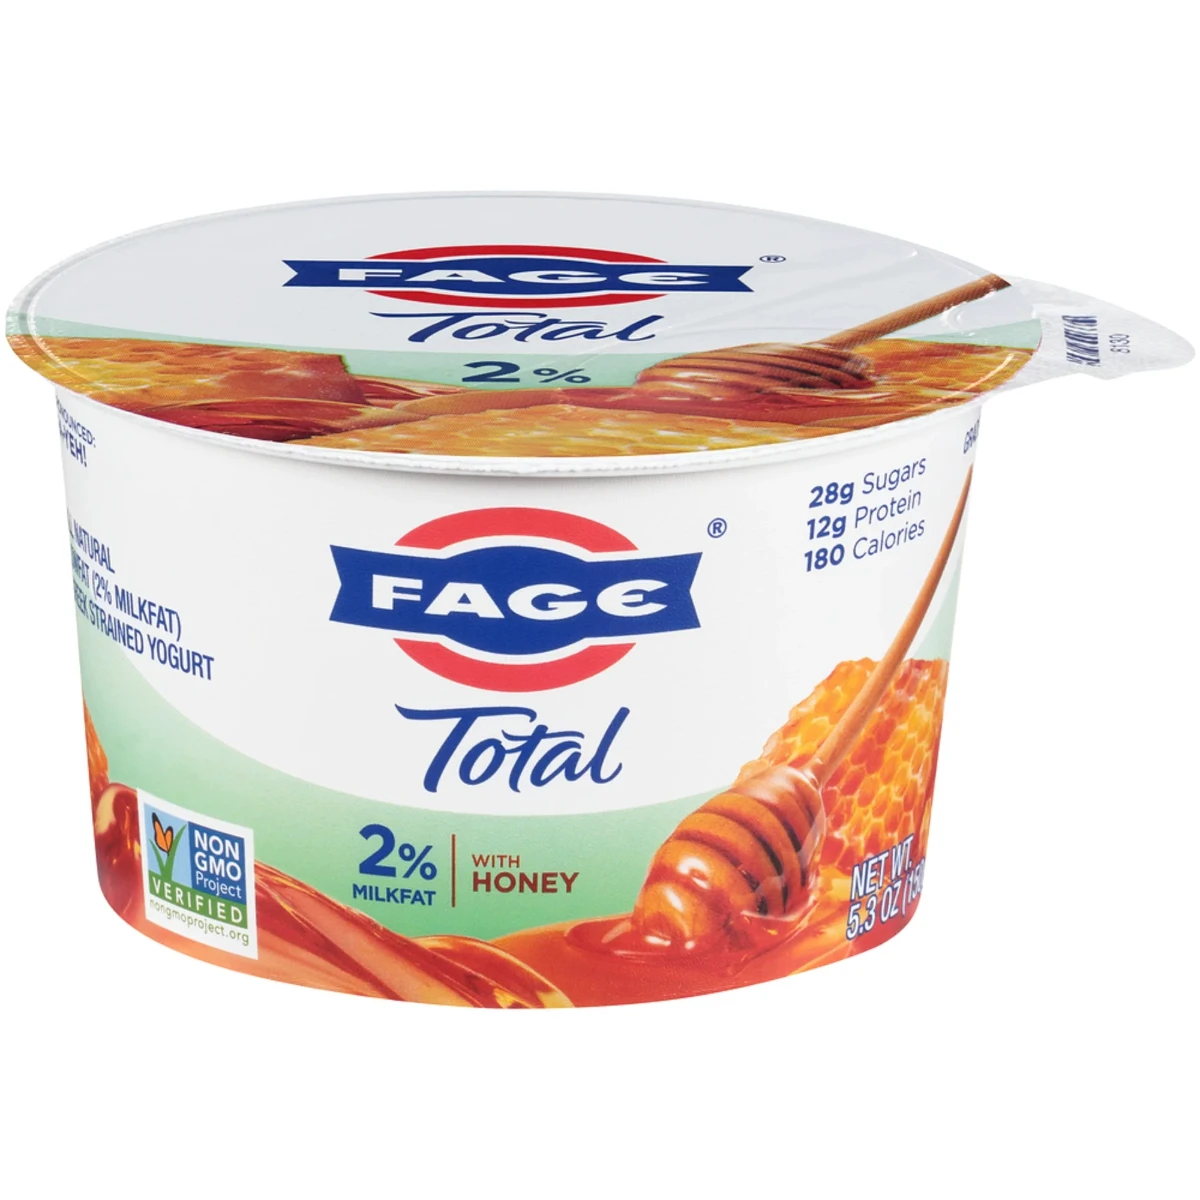 Fage Total 2% with honey